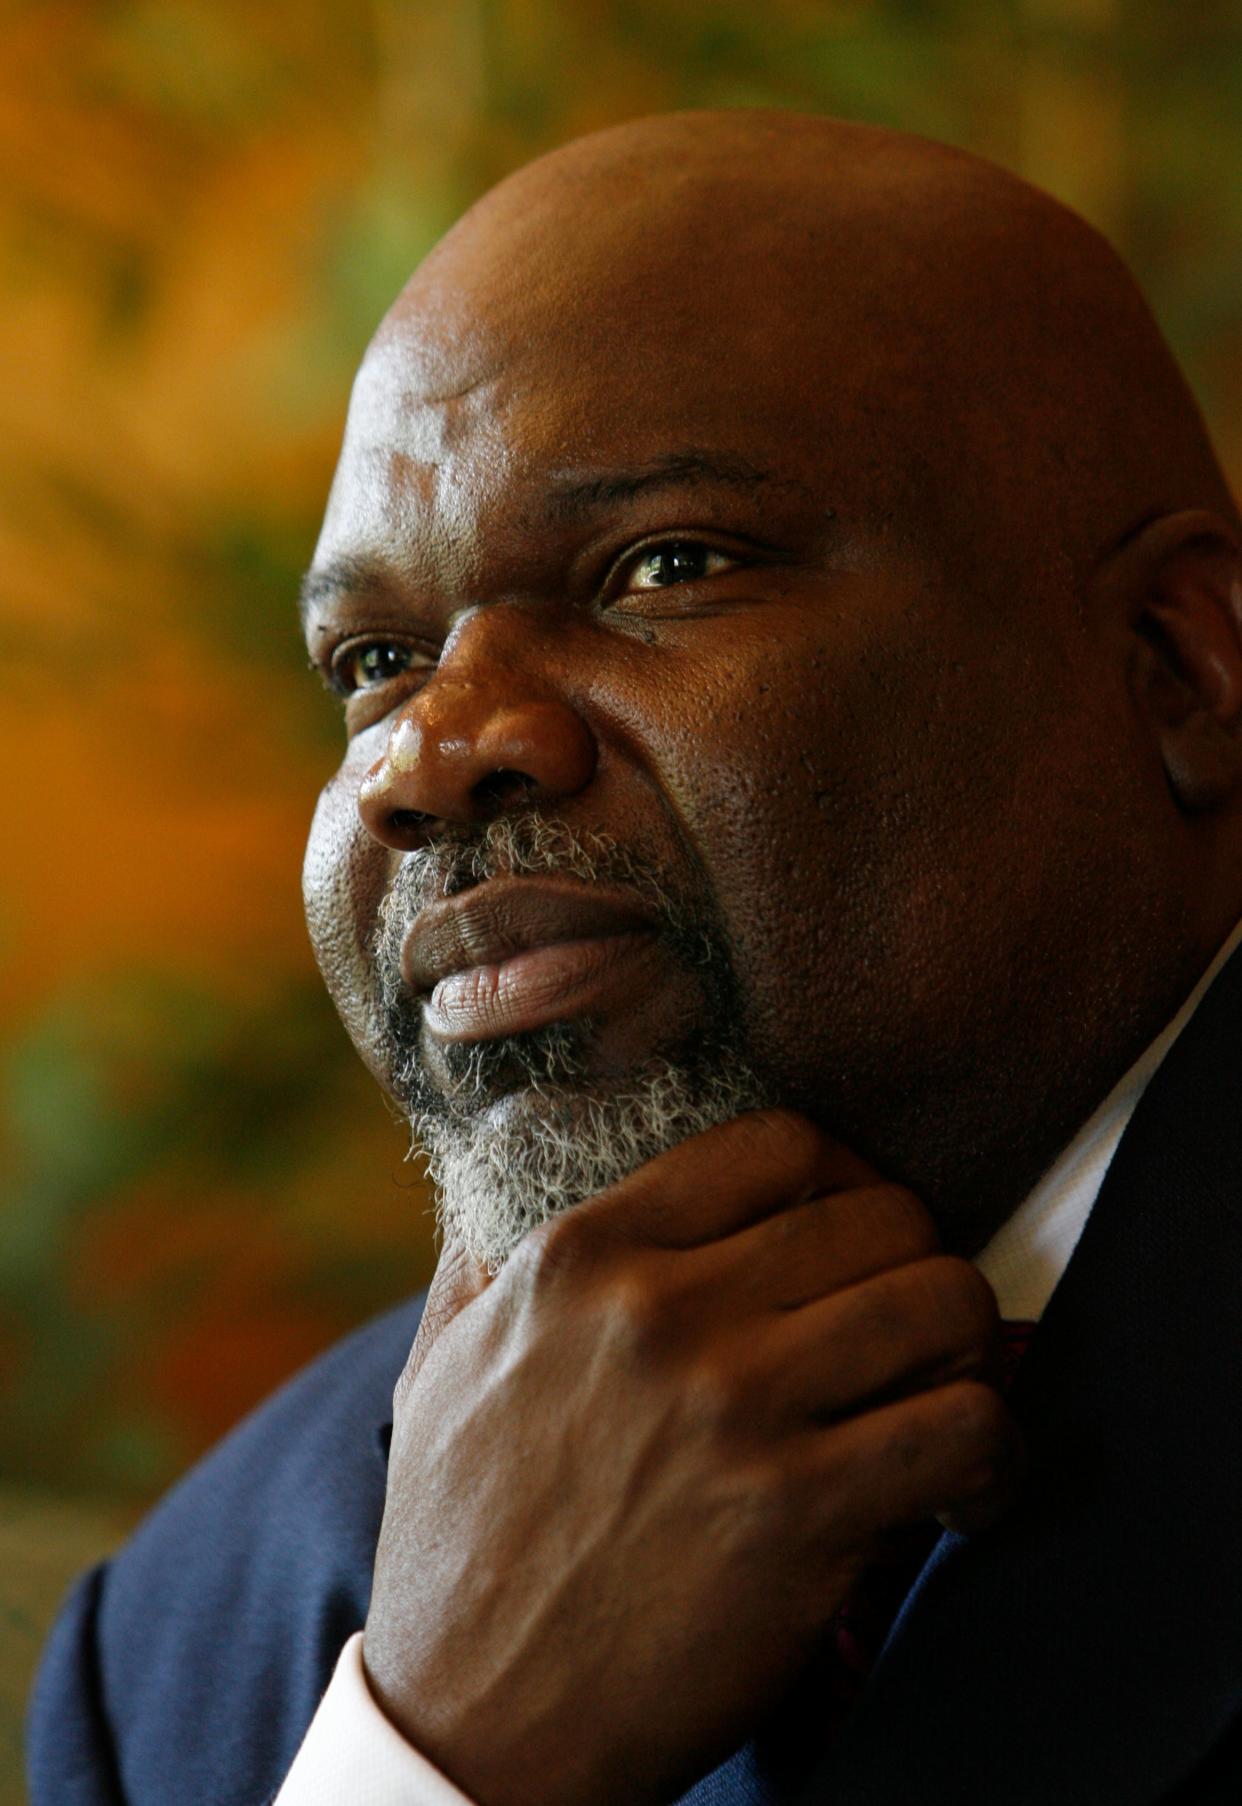 Bishop T.D. Jakes gives an interview in Washington in May 2007.